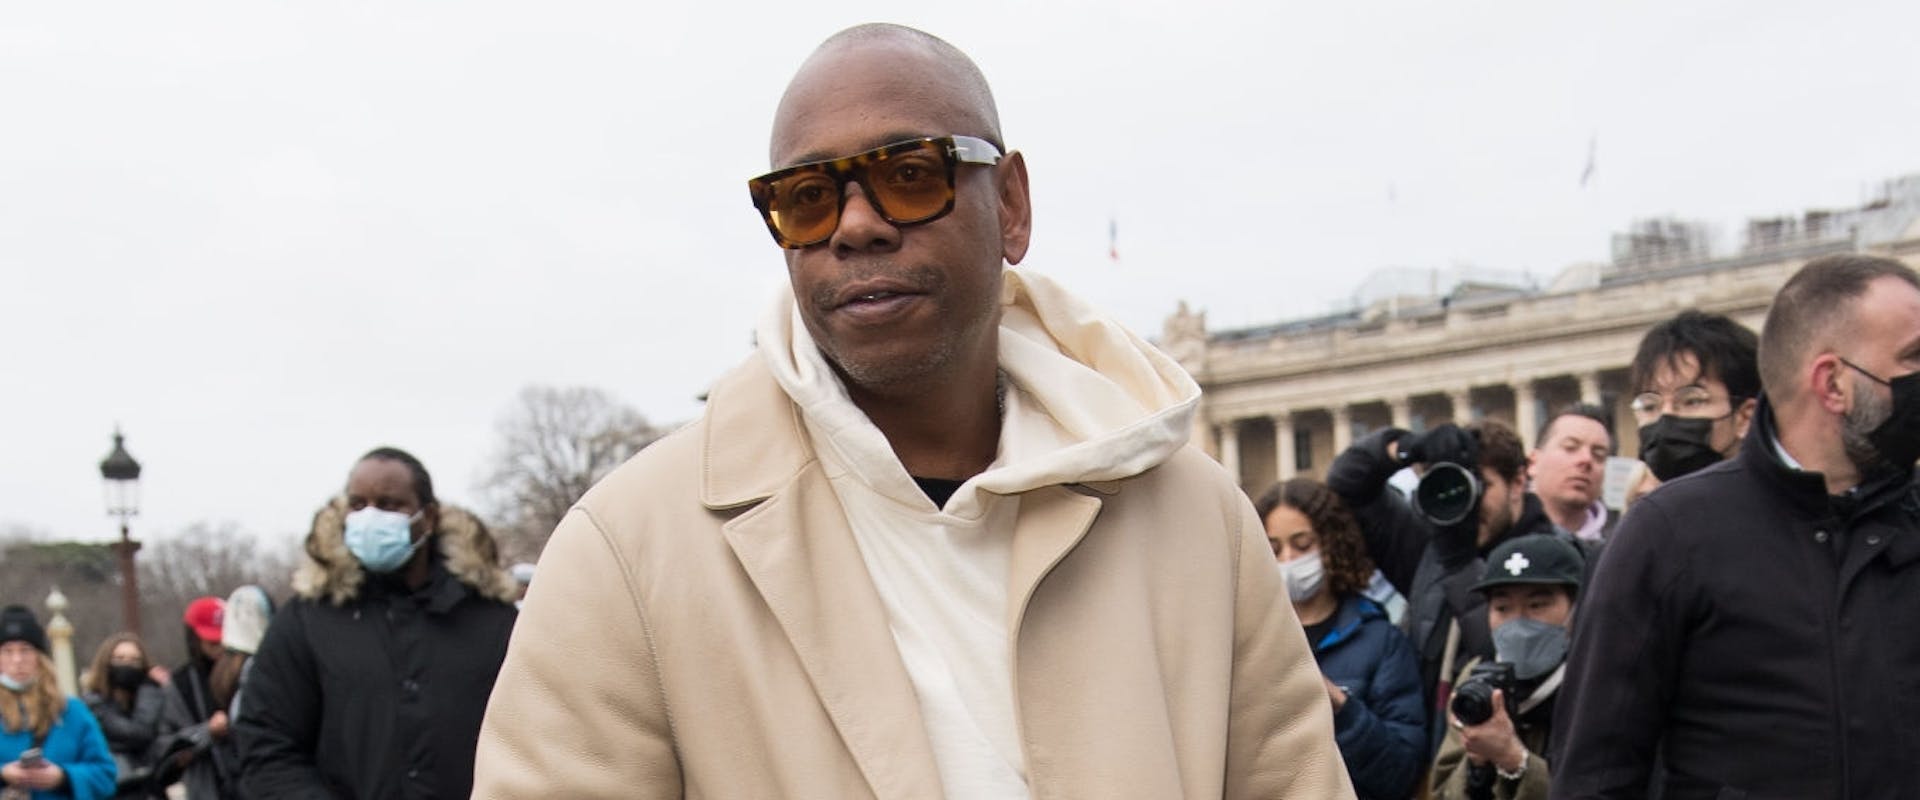 Dave Chappelle attends the Dior Homme Fall/Winter 2022/2023 show as part of Paris Fashion Week on January 21, 2022 in Paris, France.